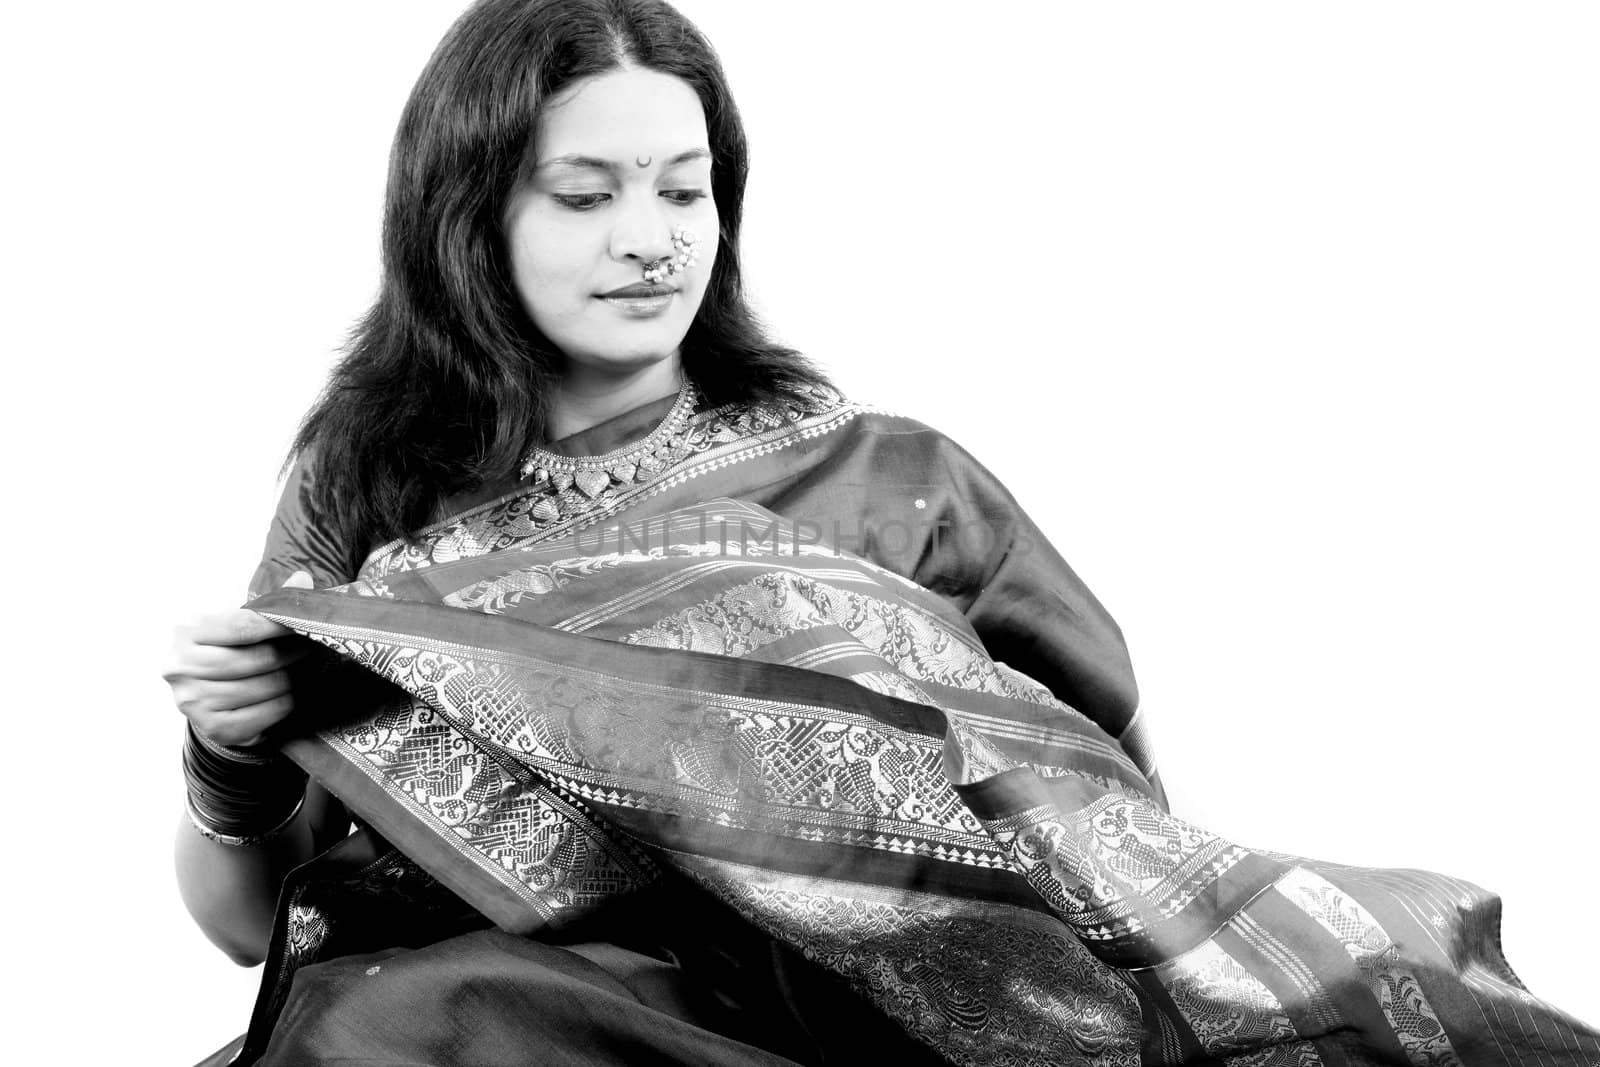 A classic portrait of a beautiful Indian woman in a sari, on white studio background.